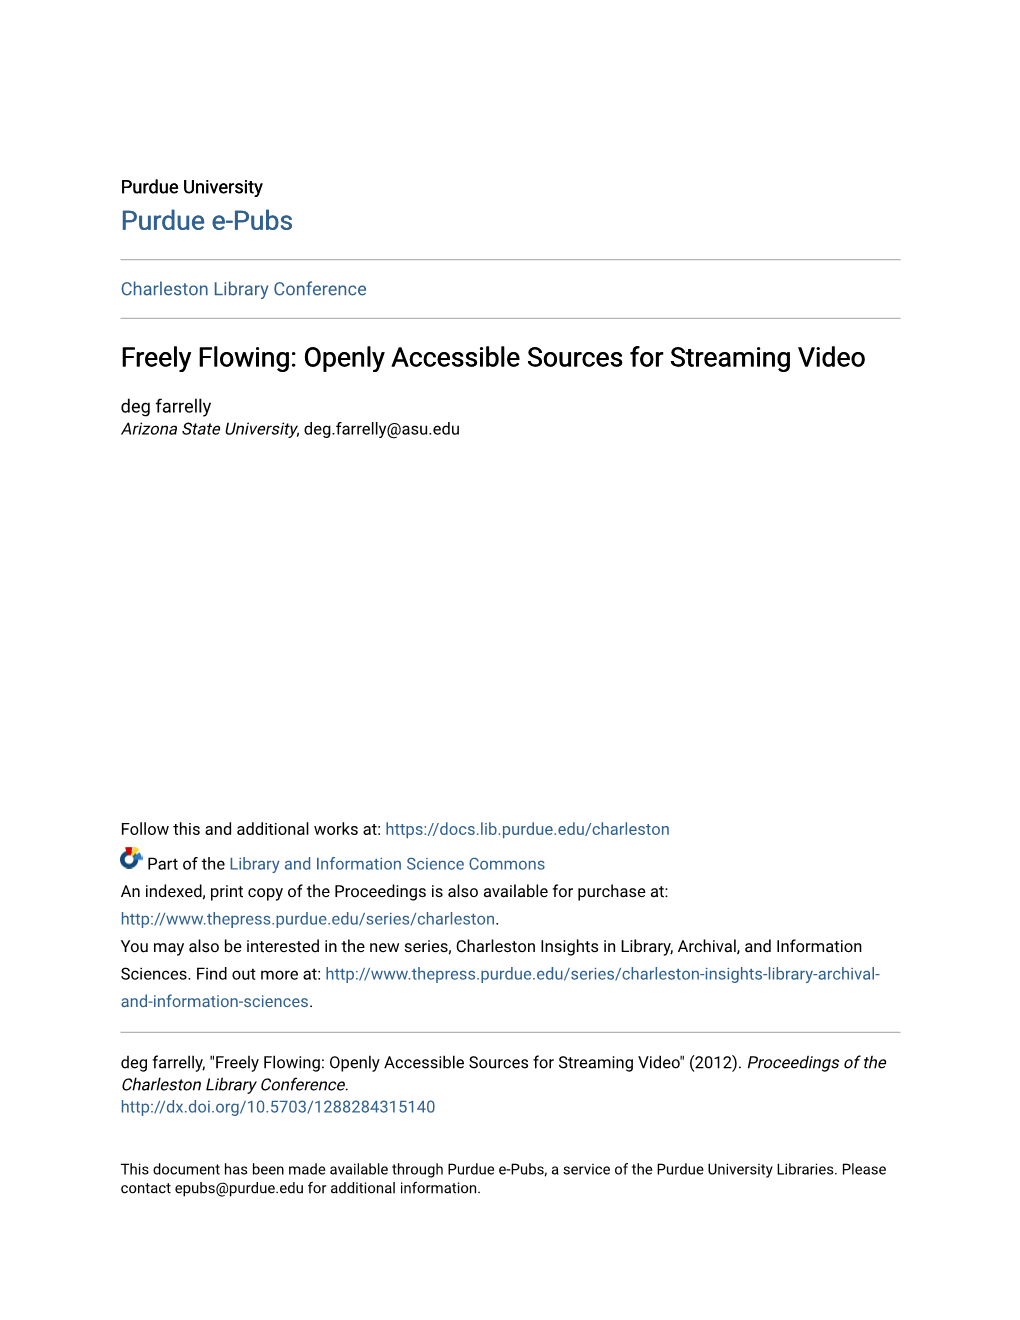 Freely Flowing: Openly Accessible Sources for Streaming Video Deg Farrelly Arizona State University, Deg.Farrelly@Asu.Edu